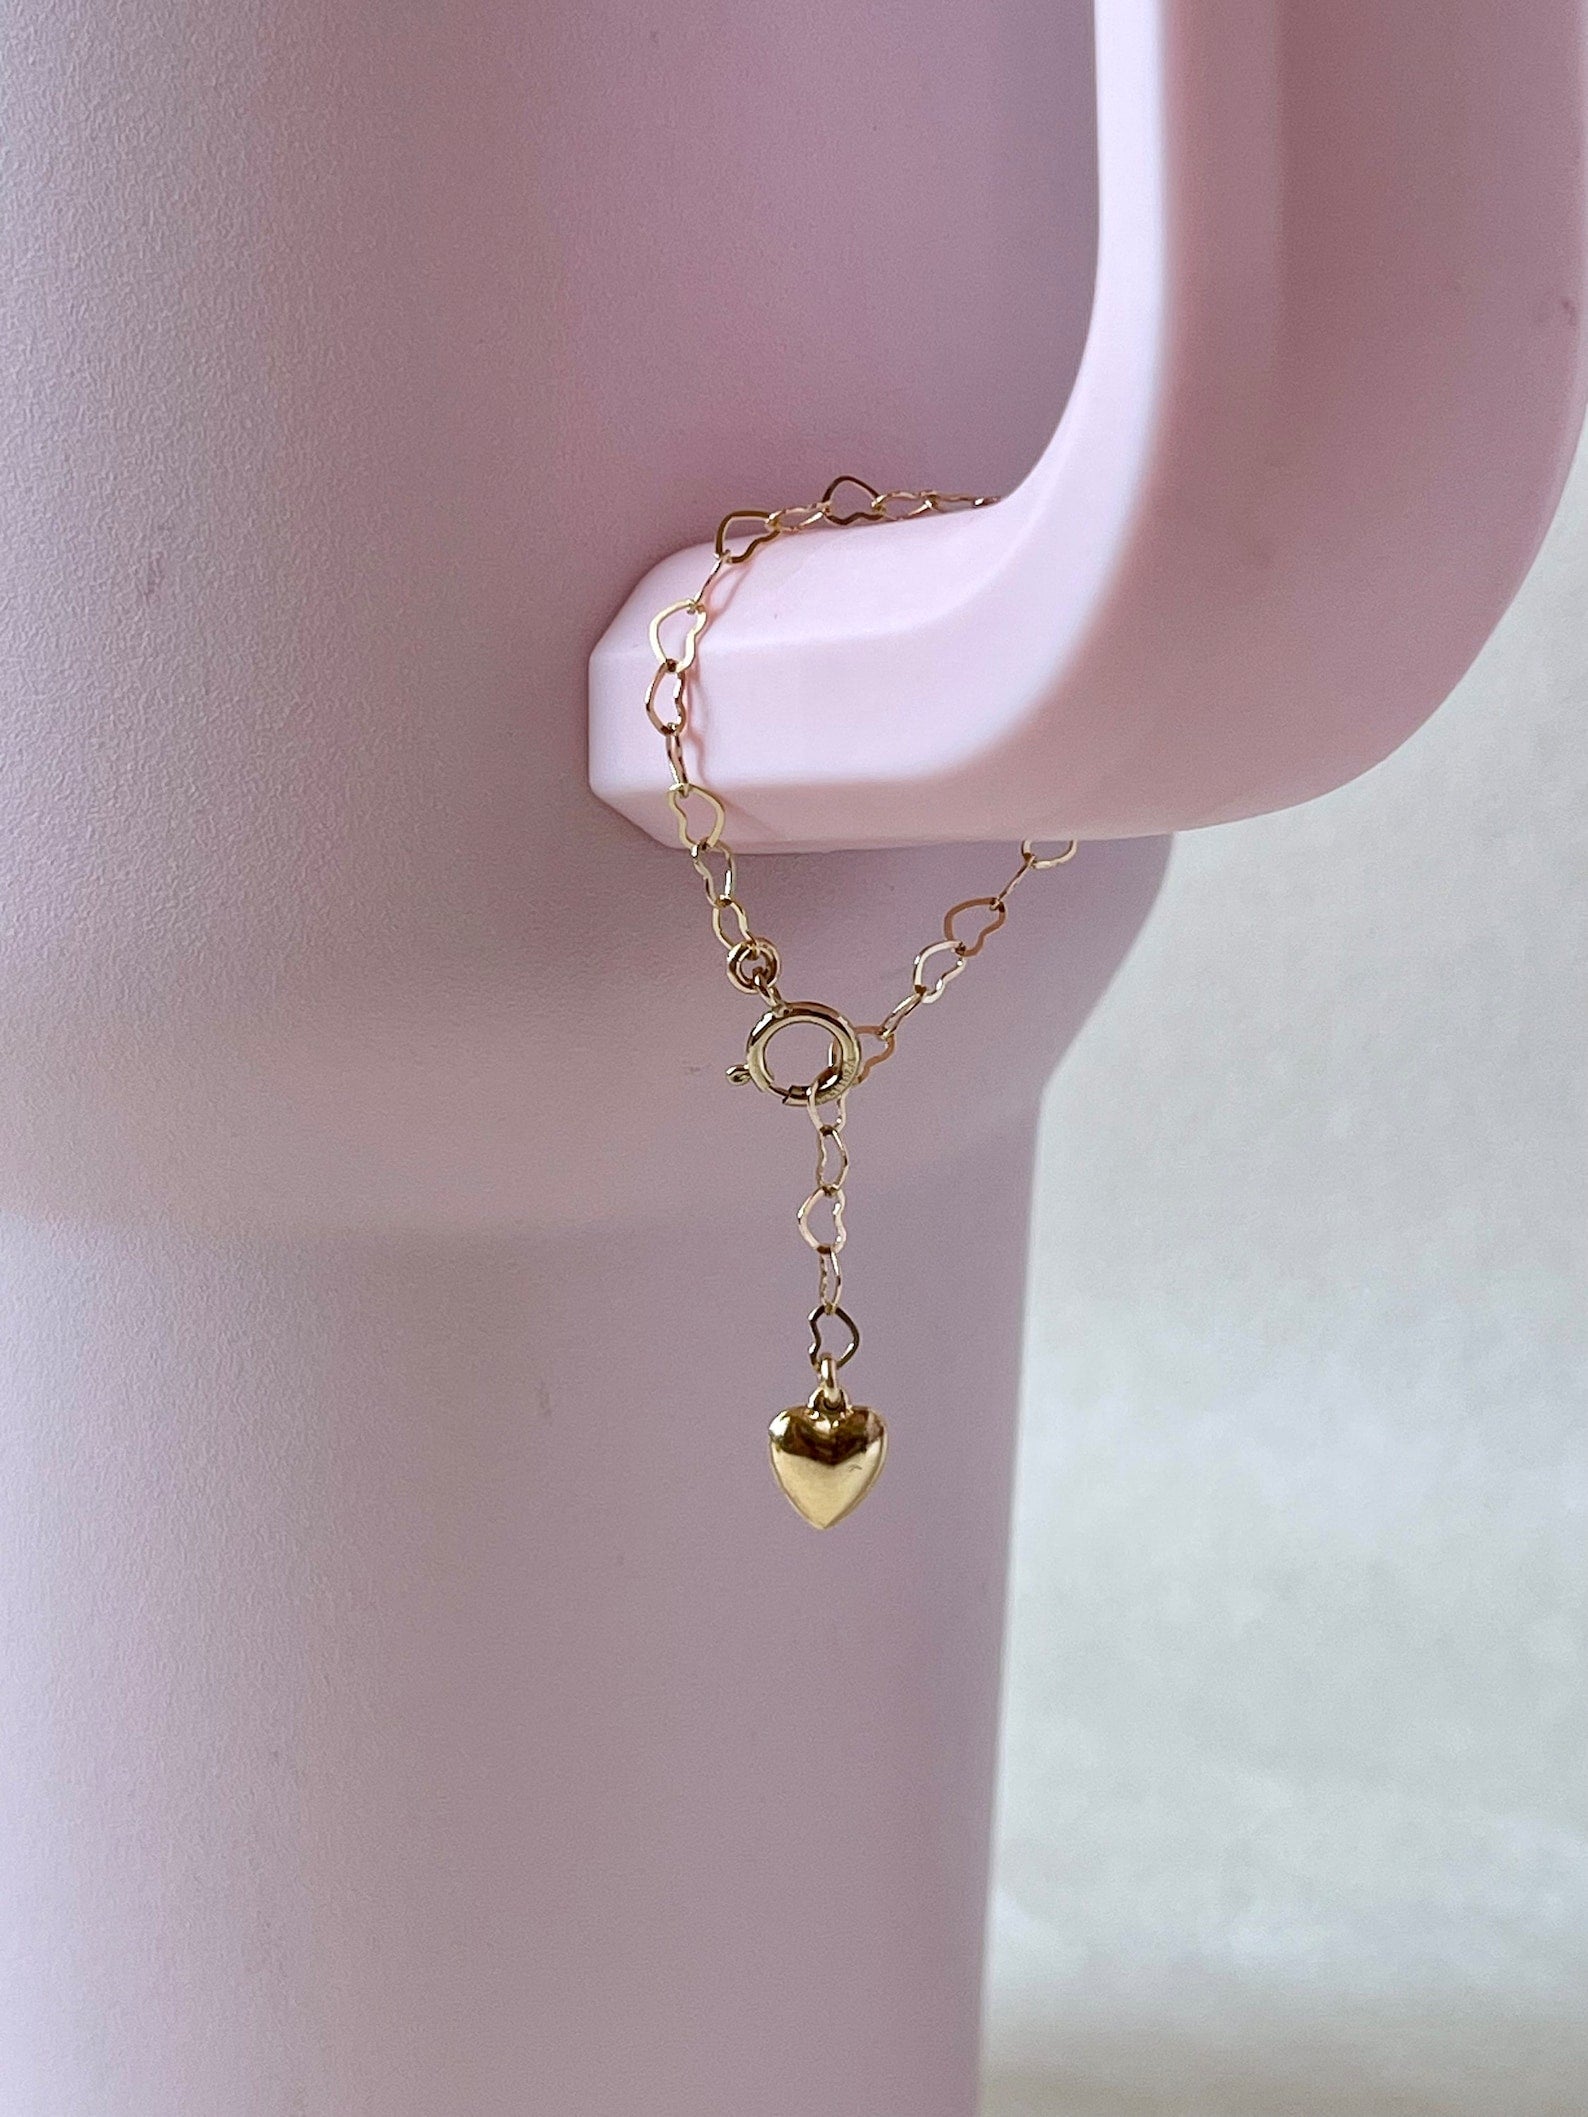 Heart Stanley Cup Charm – Sugar Fairy Jewelry